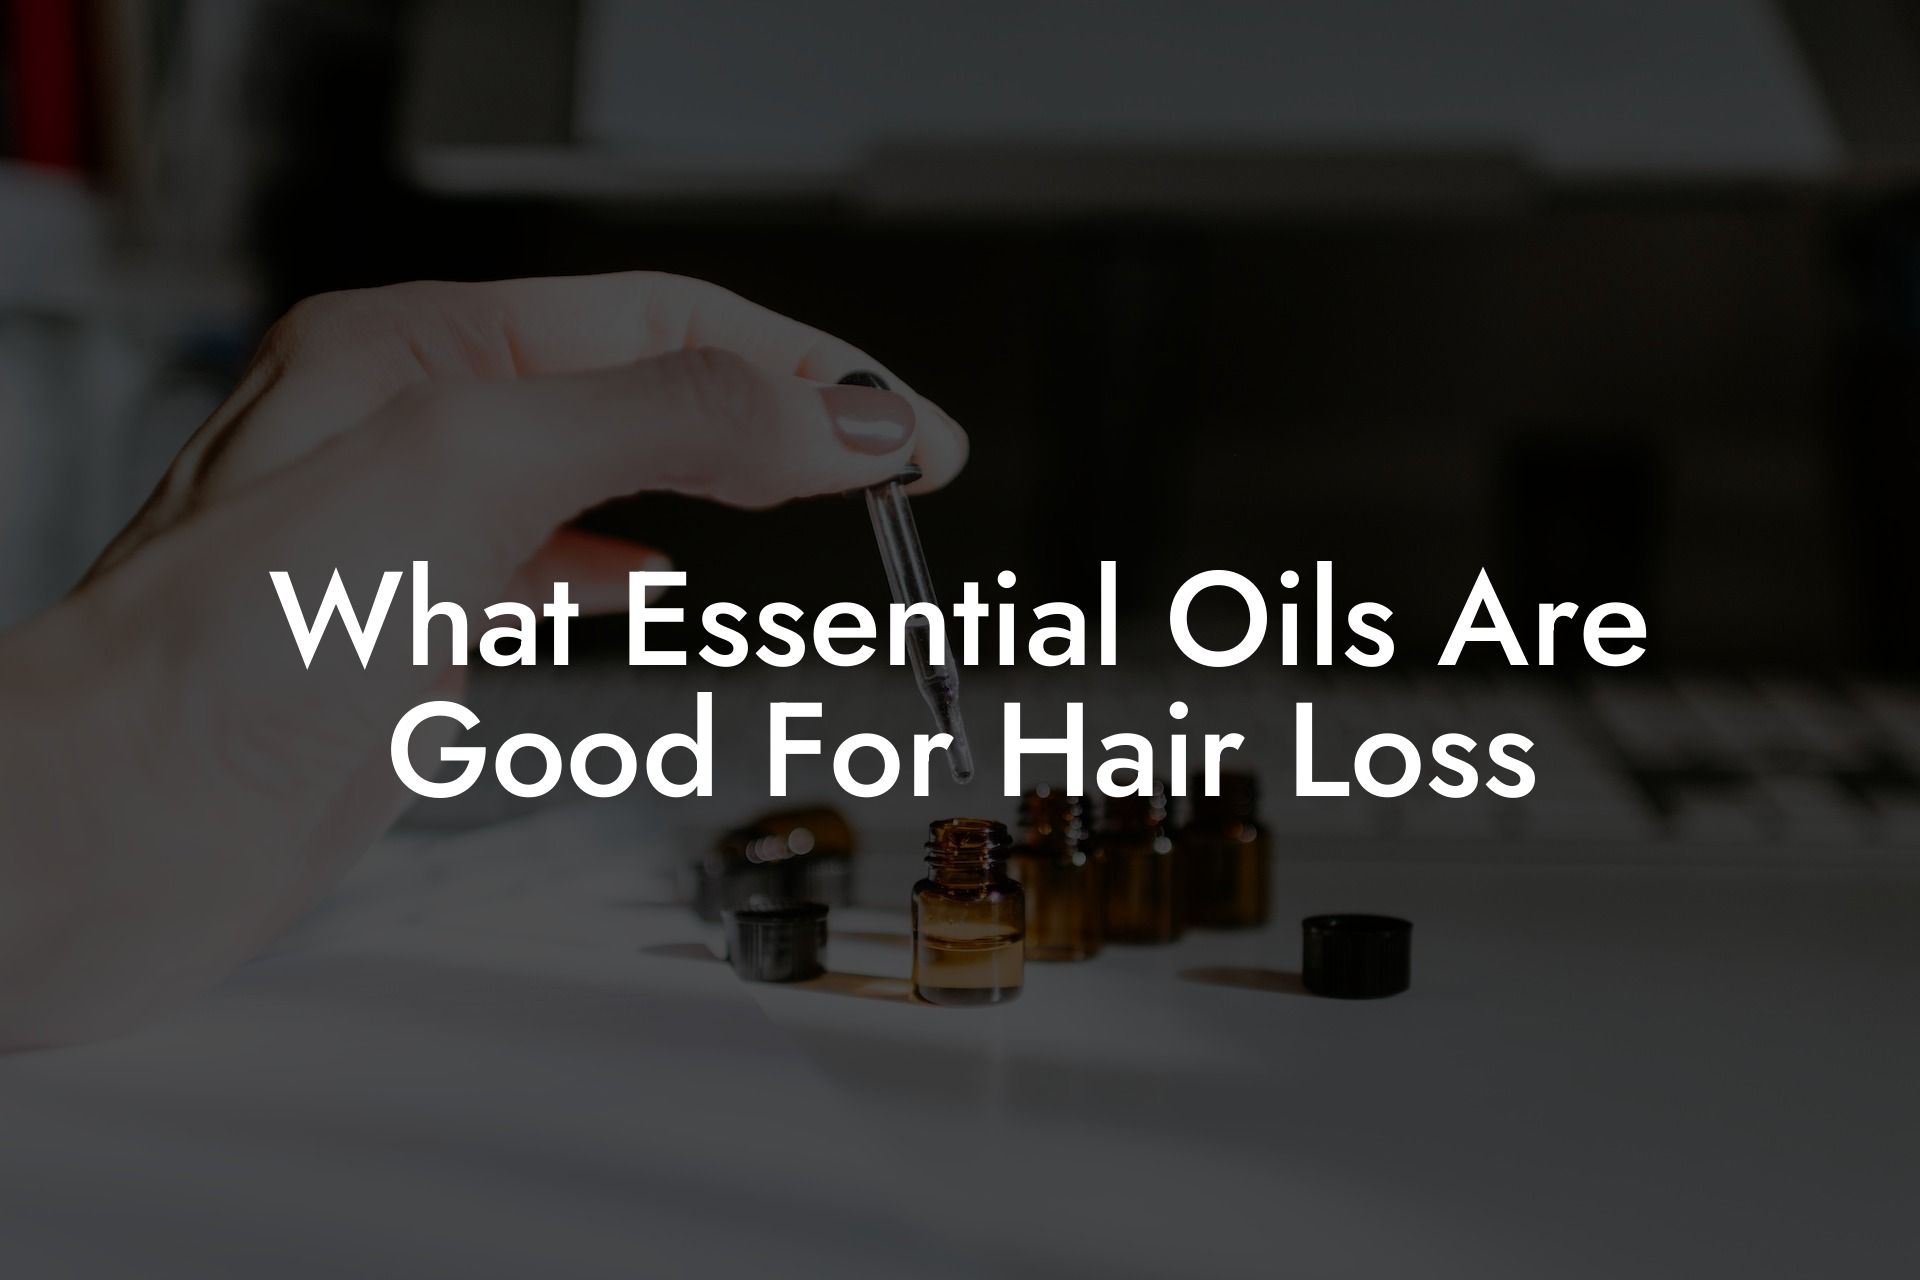 What Essential Oils Are Good For Hair Loss